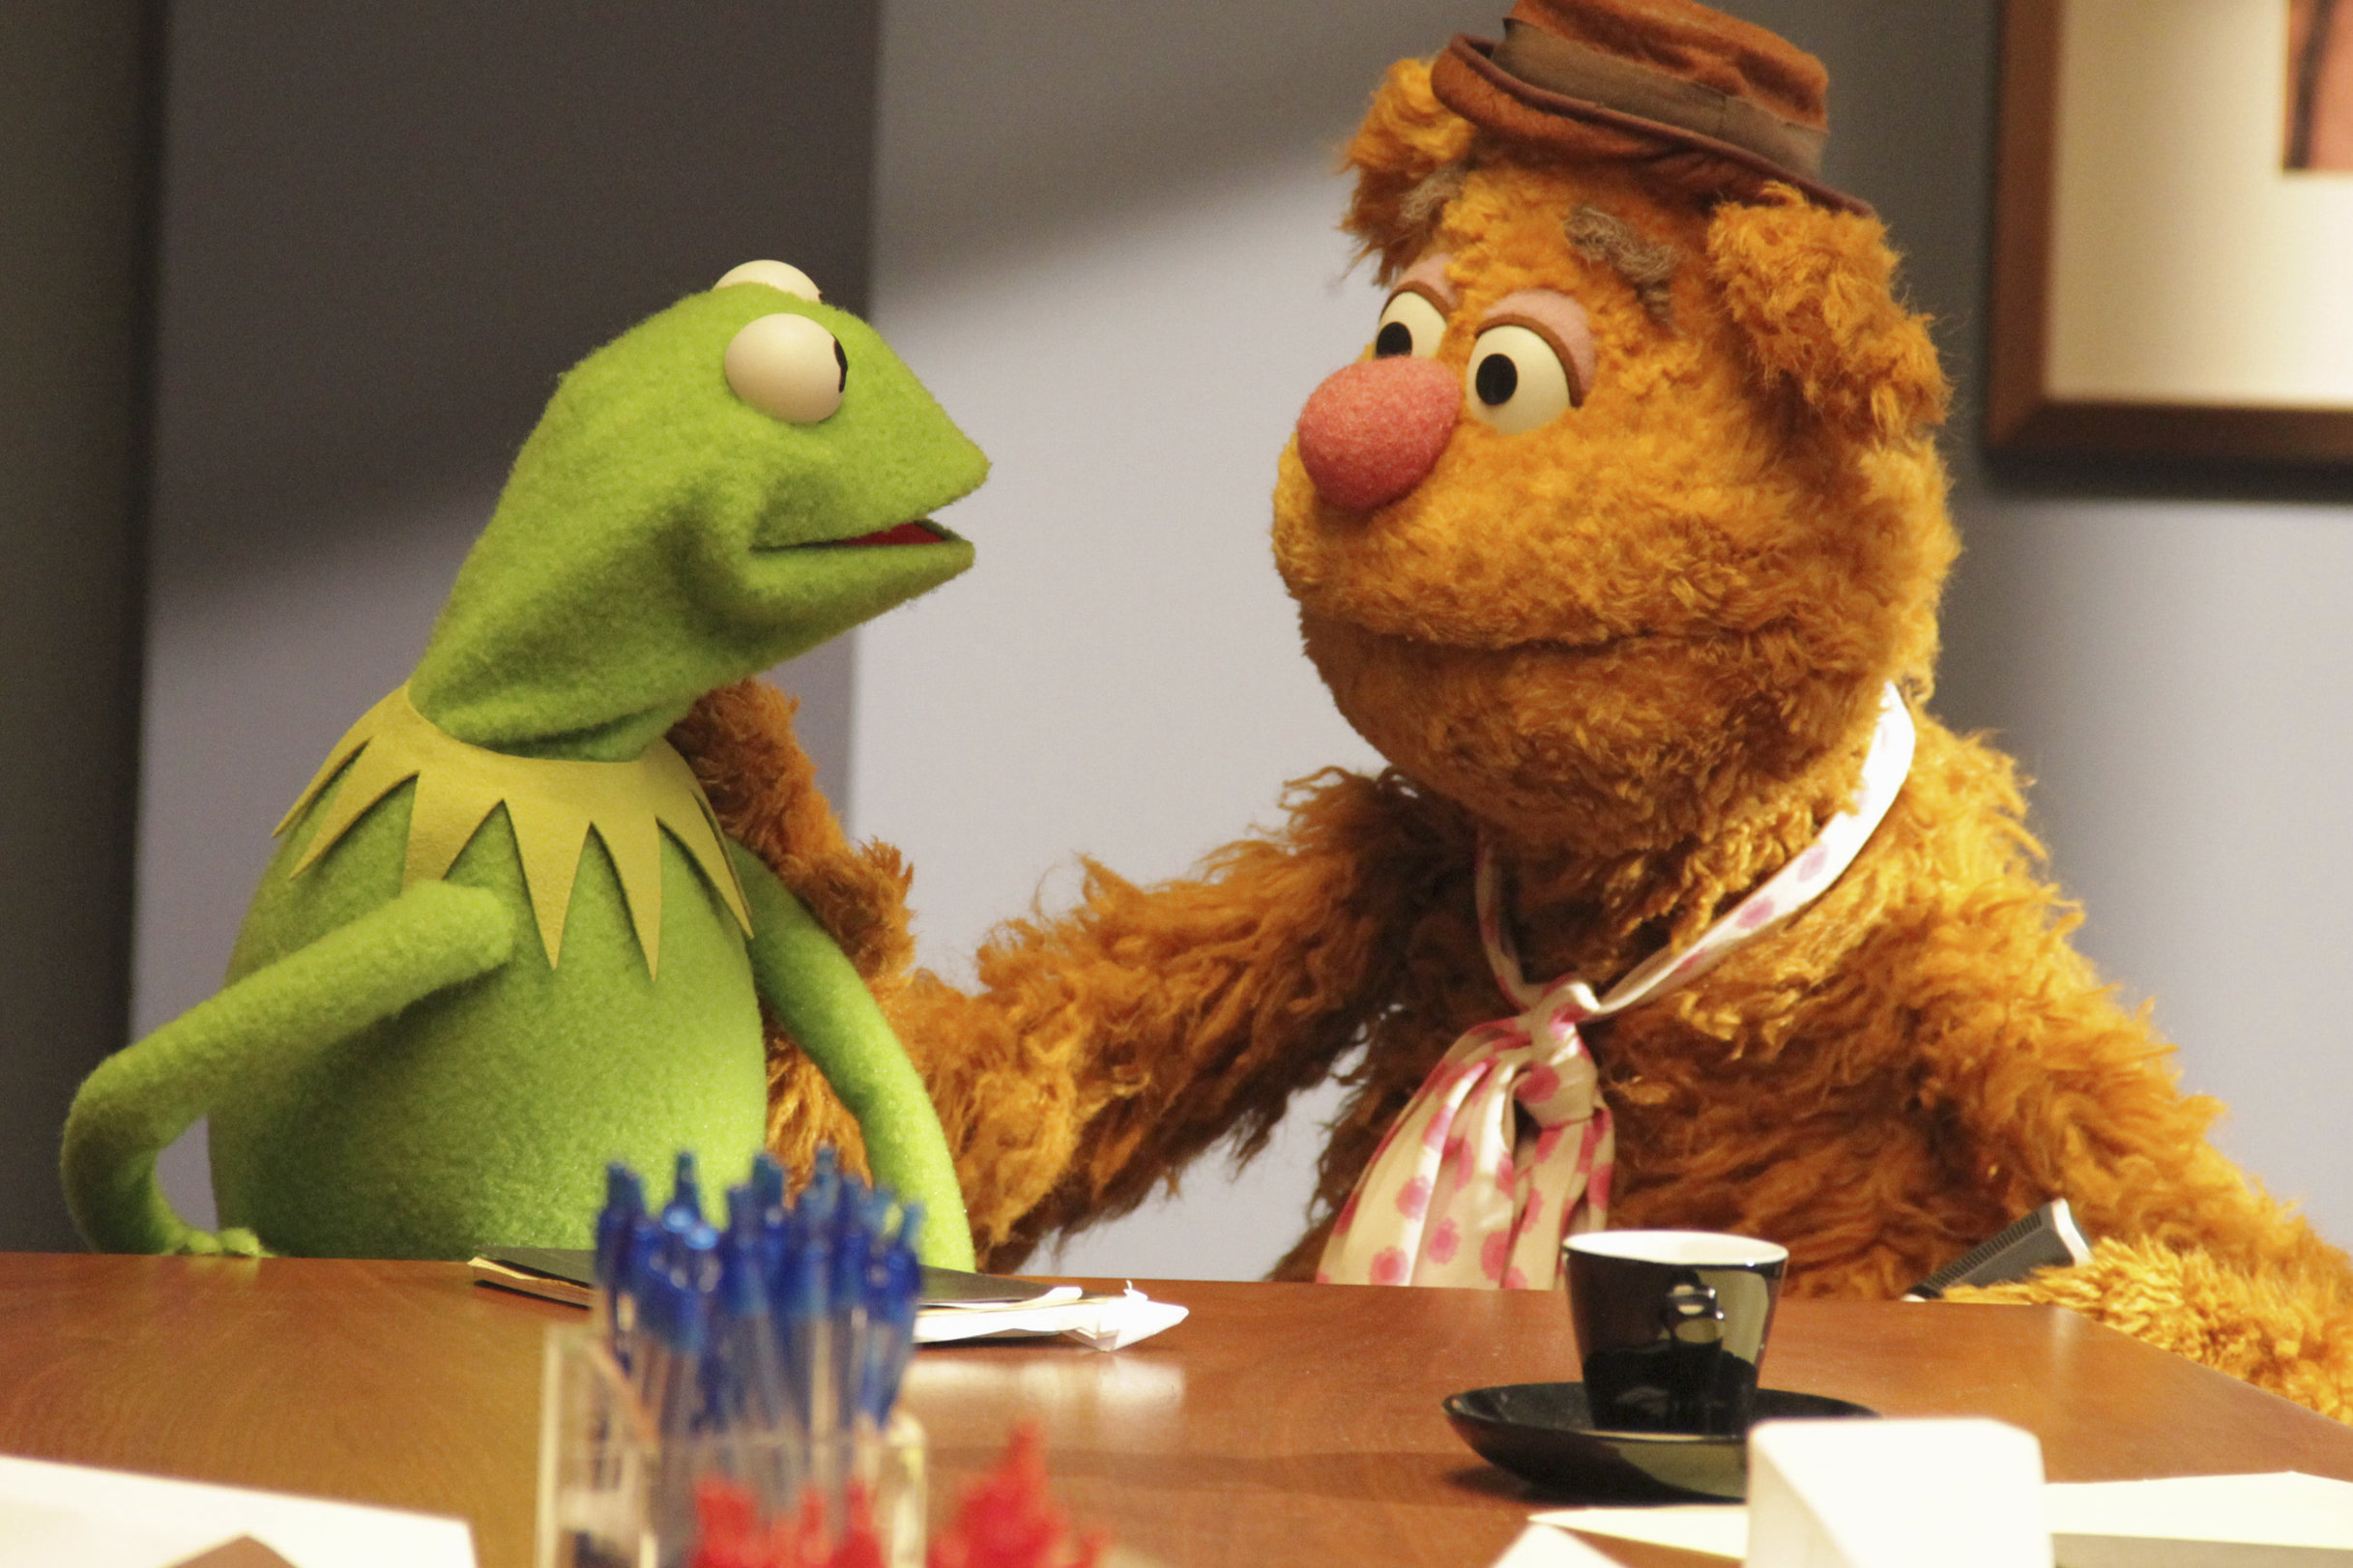 The Muppets: Fozzie Finds Out the ABC Show's Cancelled - canceled